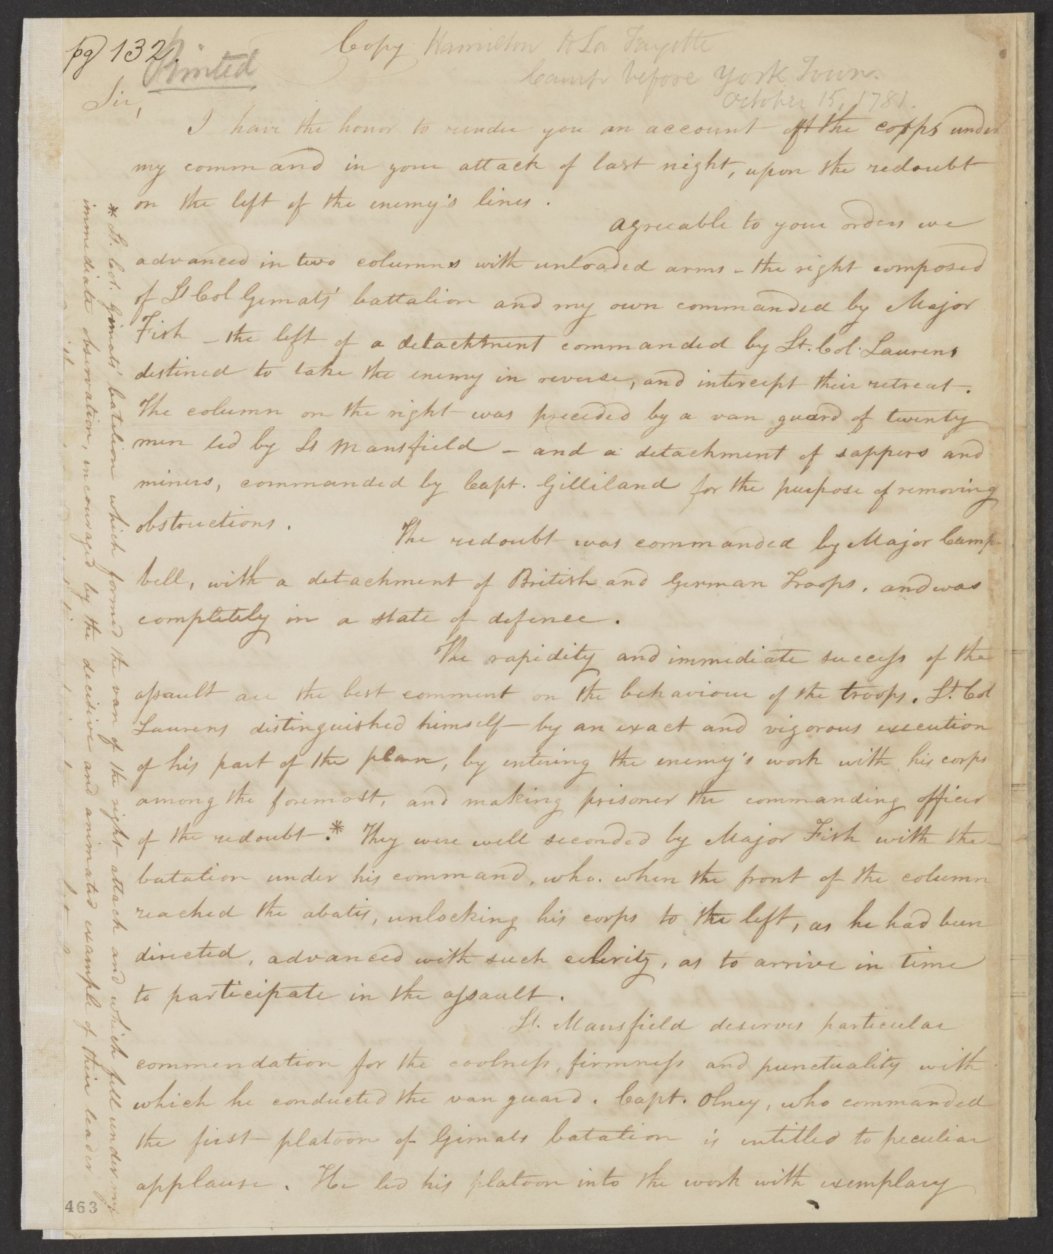 Hamilton on war: 
Oct. 15, 1781 Letter from Alexander Hamilton to the Marquis de Lafayette. 
      Song: “Yorktown (The World Turned Upside Down)” 

Hamilton got his wish and went to war as an officer fighting for the Revolution. In this letter to the Marquis de Lafayette, he's reporting on a joint French and American attack on the British in Yorktown, Virginia. The Battle of Yorktown was the last of the Revolutionary War. 
 
A portion of letter reads: “I have the honor to render you an account of the corps under my command in your attack of last night, upon the redoubt on the left of the enemy’s lines. . . . Inclosed is a return of the prisoners. The killed and wounded of the enemy did not exceed eight. Incapable of imitating examples of barbarity, and forgetting recent provocations, the soldiery spared every man, who ceased to resist.”
(Courtesy Alexander Hamilton Papers, Manuscript Division, Library of Congress)